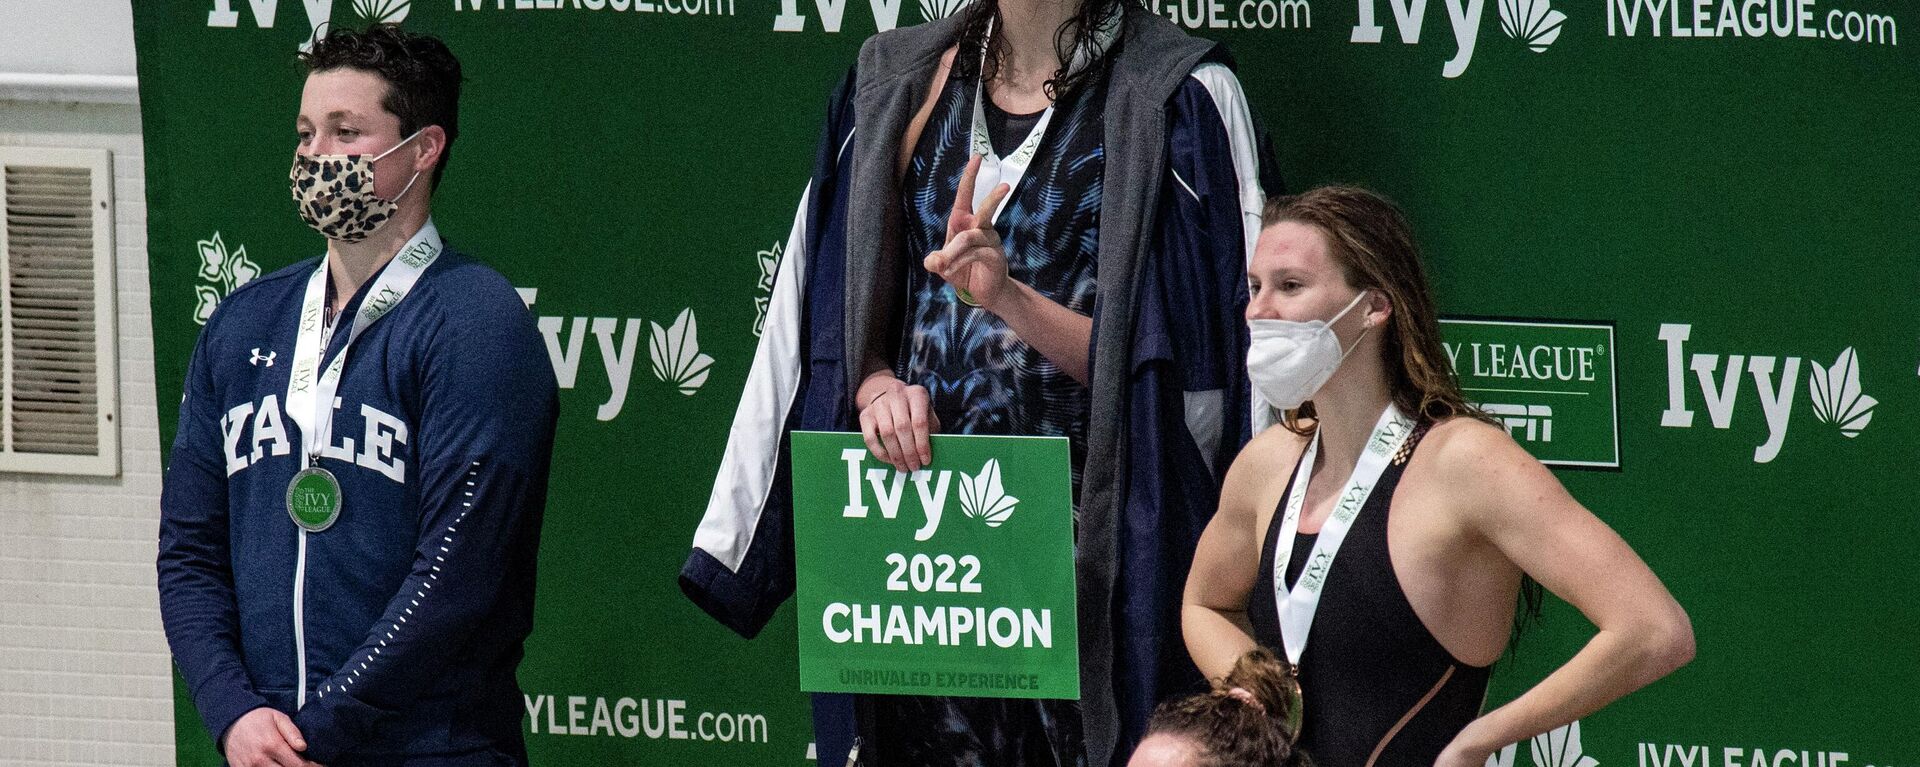 In this file photo taken on February 19, 2022 transgender swimmer Lia Thomas (2nd L) of Penn University and transgender swimmer Iszac Henig (L) of Yale pose with their medals after placing first and second in the 100-yard freestyle swimming race at the 2022 Ivy League Women's Swimming & Diving Championships at Harvard University in Cambridge, Massachusetts. - Sputnik International, 1920, 20.06.2022